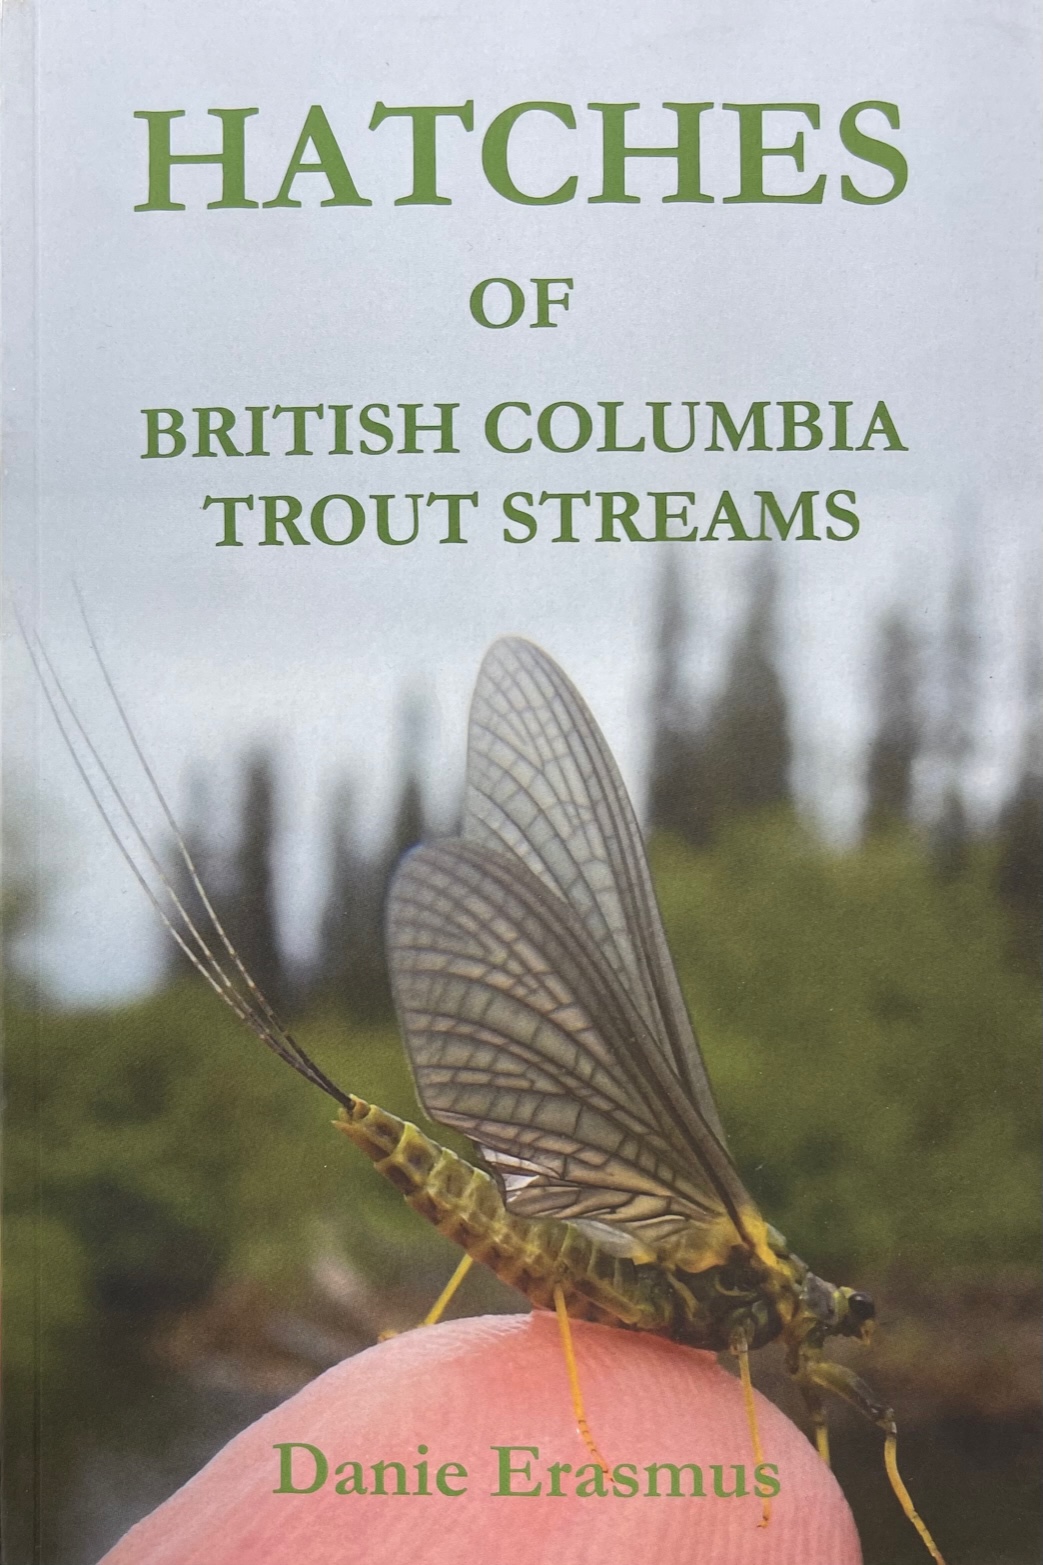 Hatches of British Columbia Trout Streams